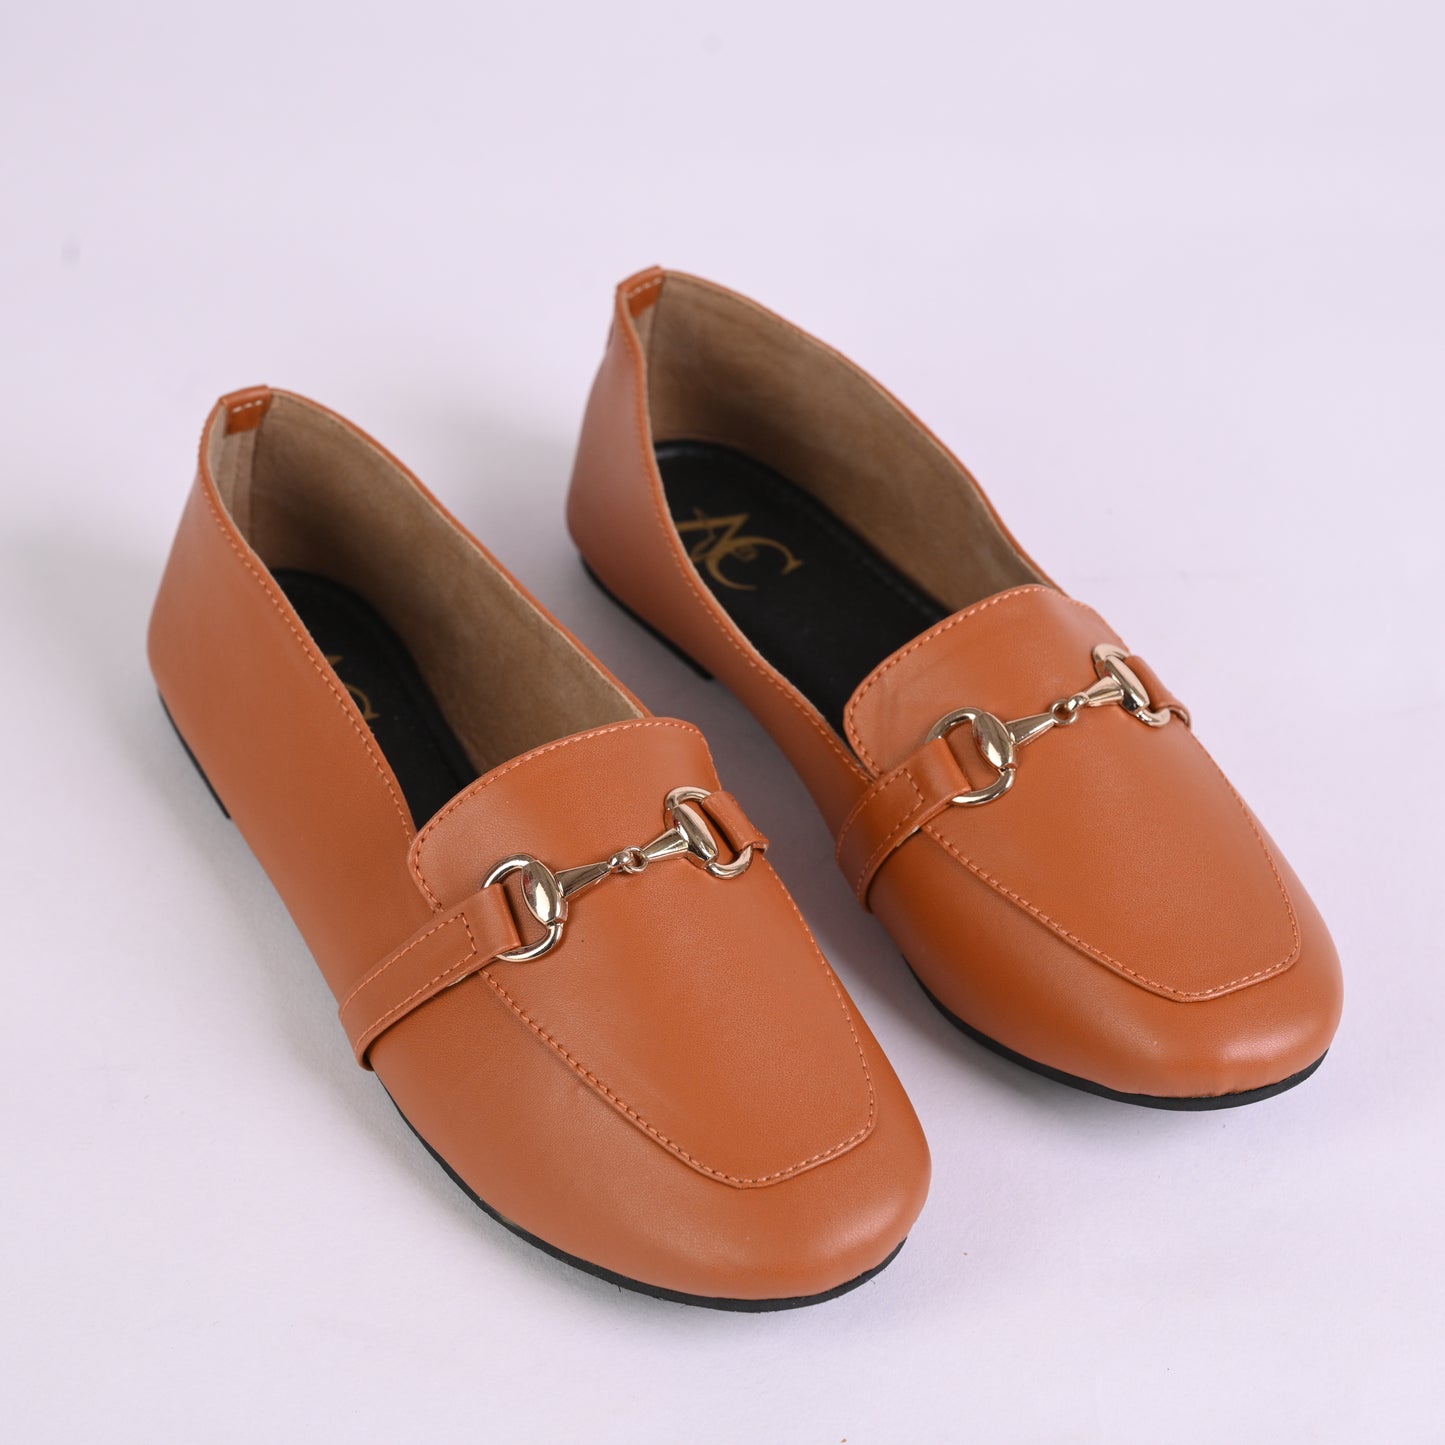 Buckled Casual Loafers For Women (Tan)